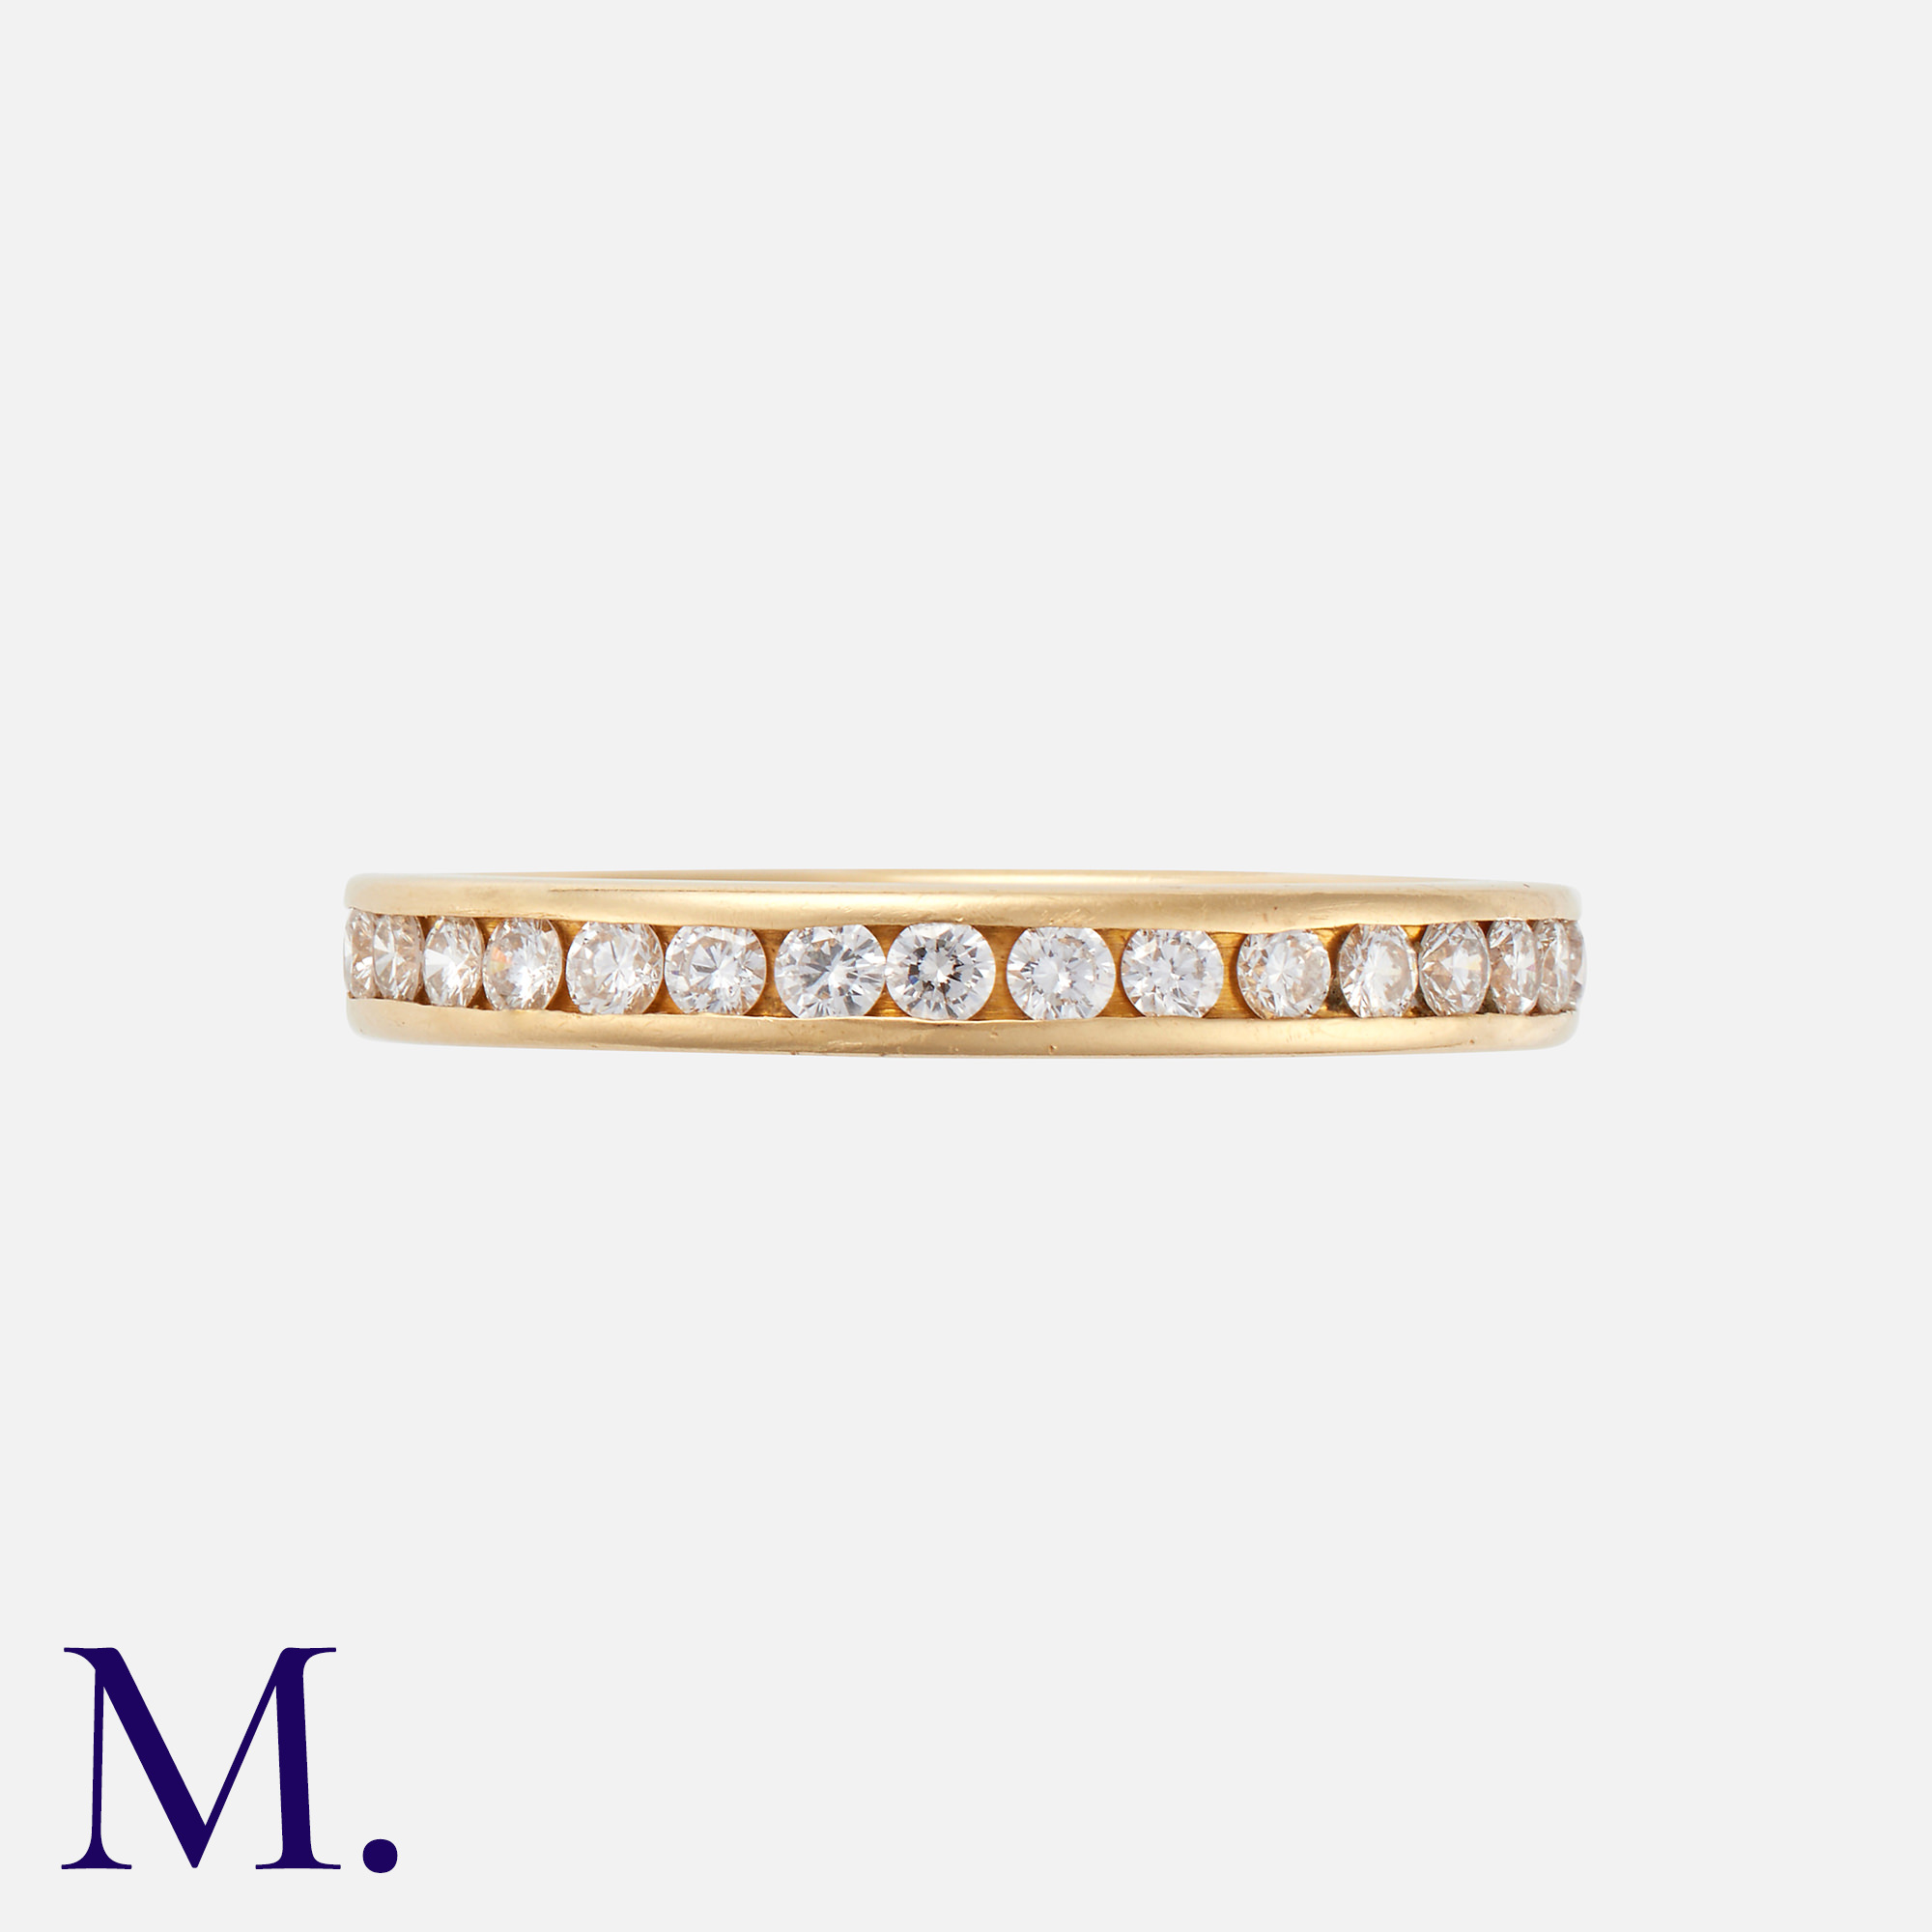 TIFFANY & CO. A Diamond Eternity Ring in 18K yellow gold, set with round brilliant diamonds weighing - Image 2 of 2